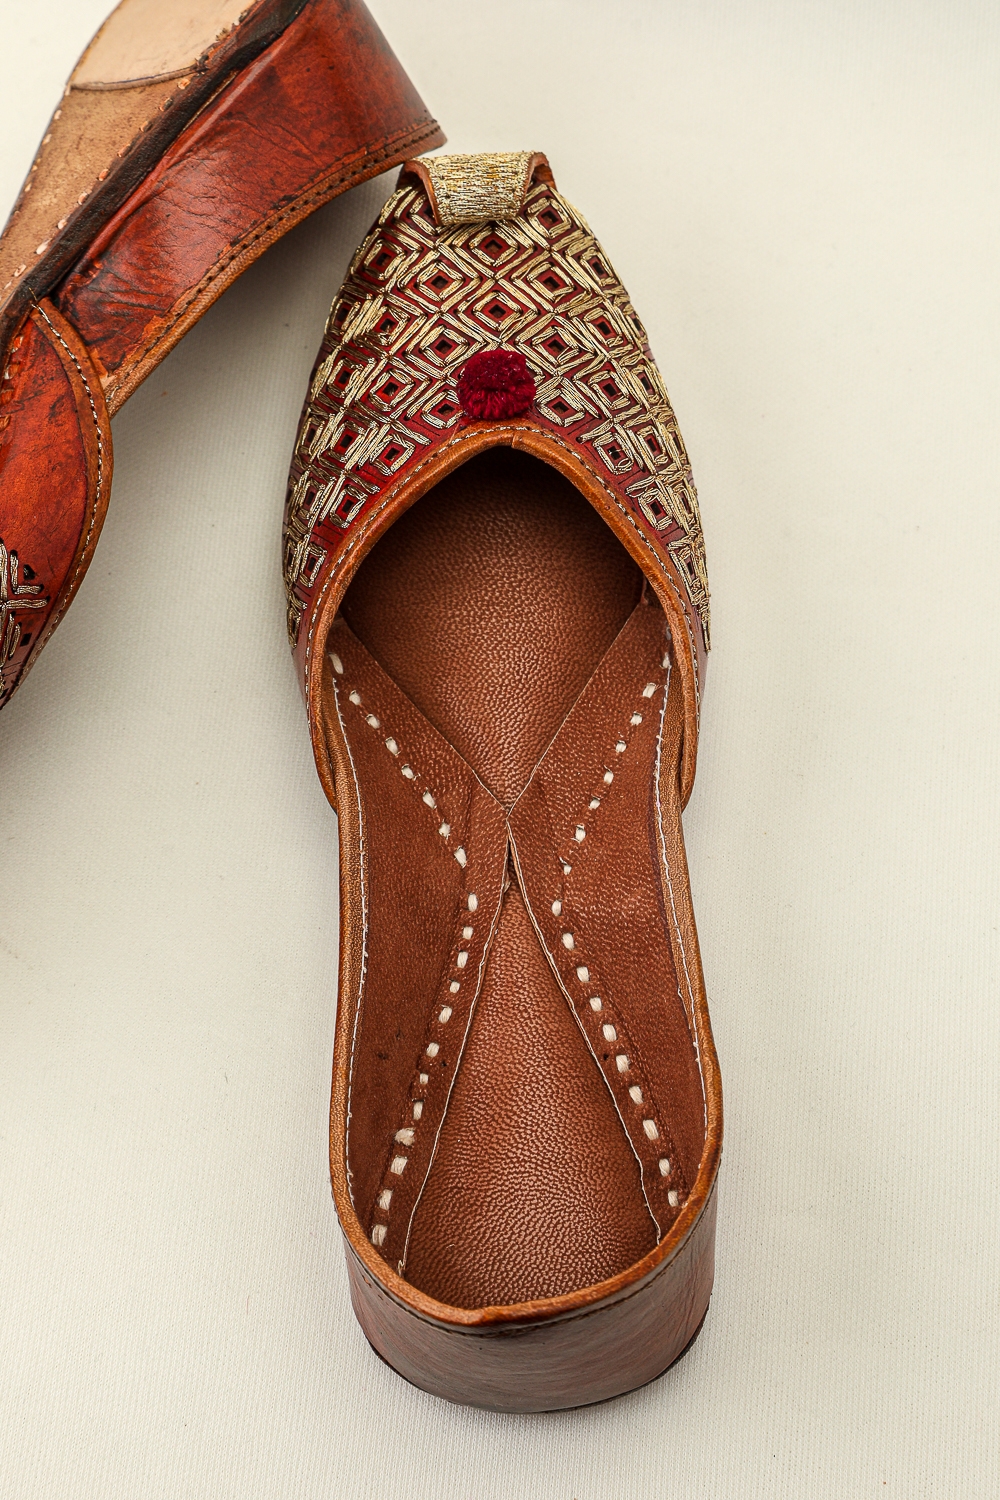 Handcrafted Leather mojaris with Embroidery